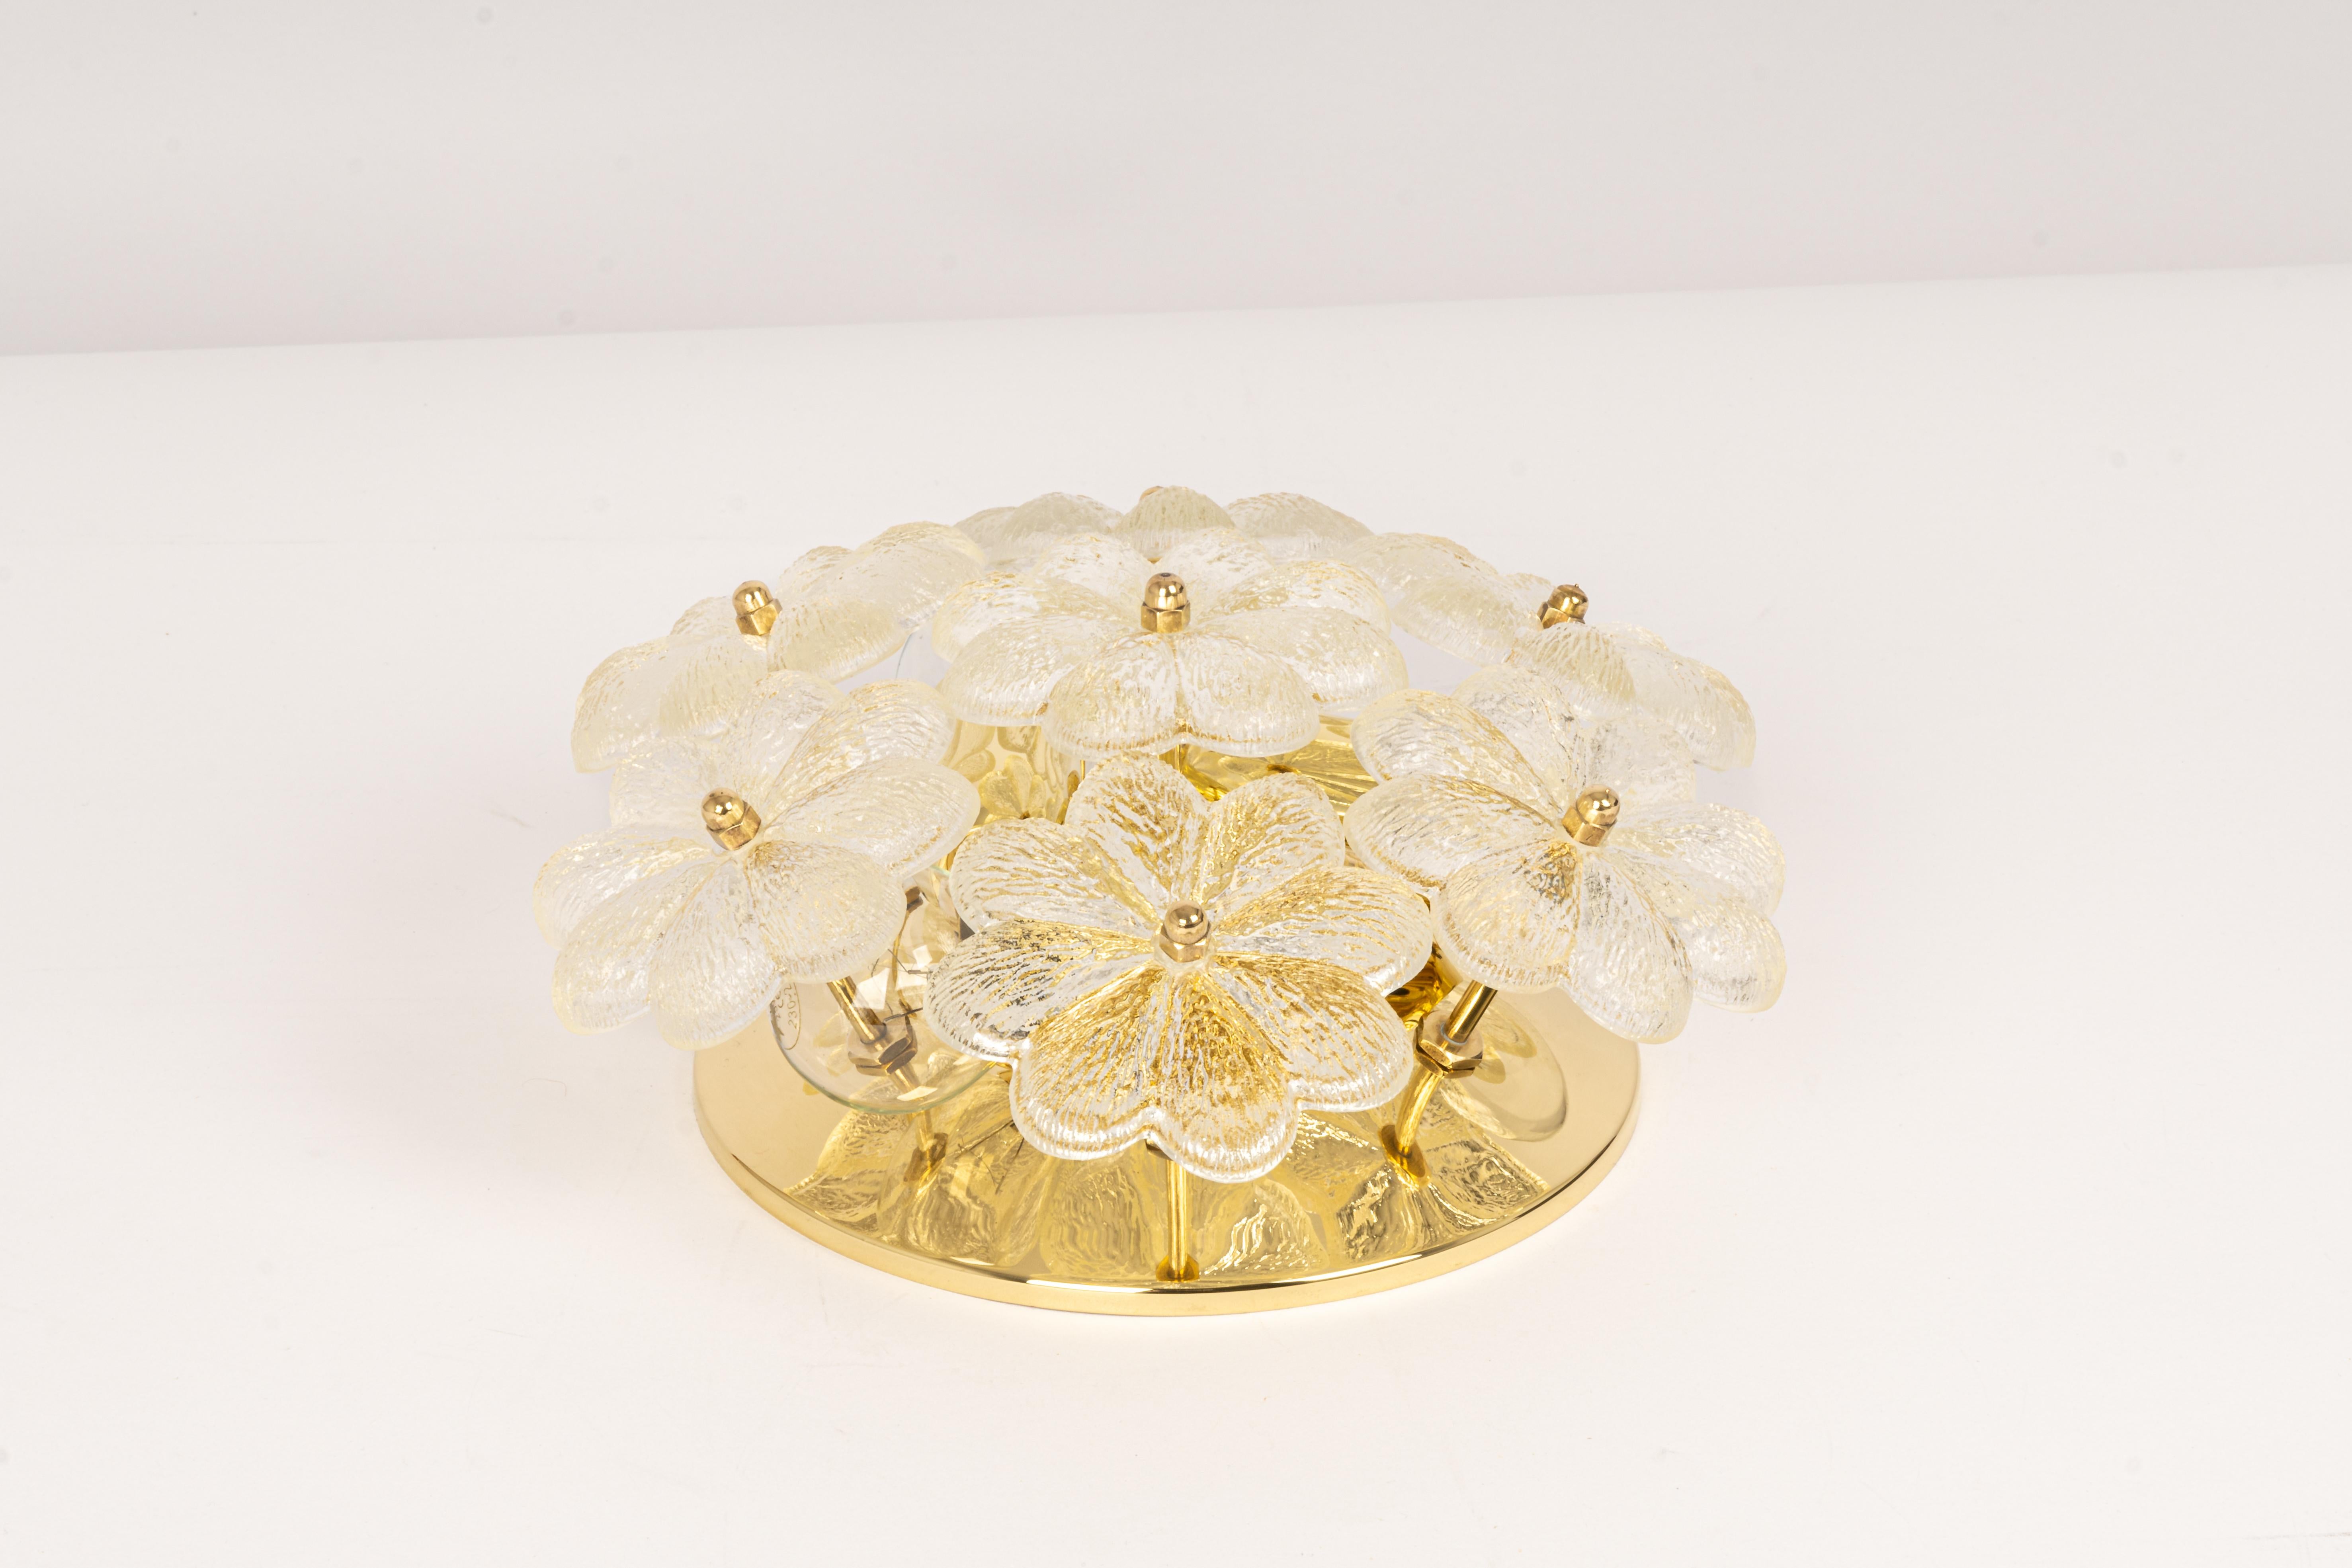 Petite mid-century flush mount light or wall sconce with 7 Murano glass flowers over a polished brass base, made by Ernst Palme in Germany, 1970s.
Wonderful light effect.
High quality and in very good condition. Cleaned, well-wired, and ready to